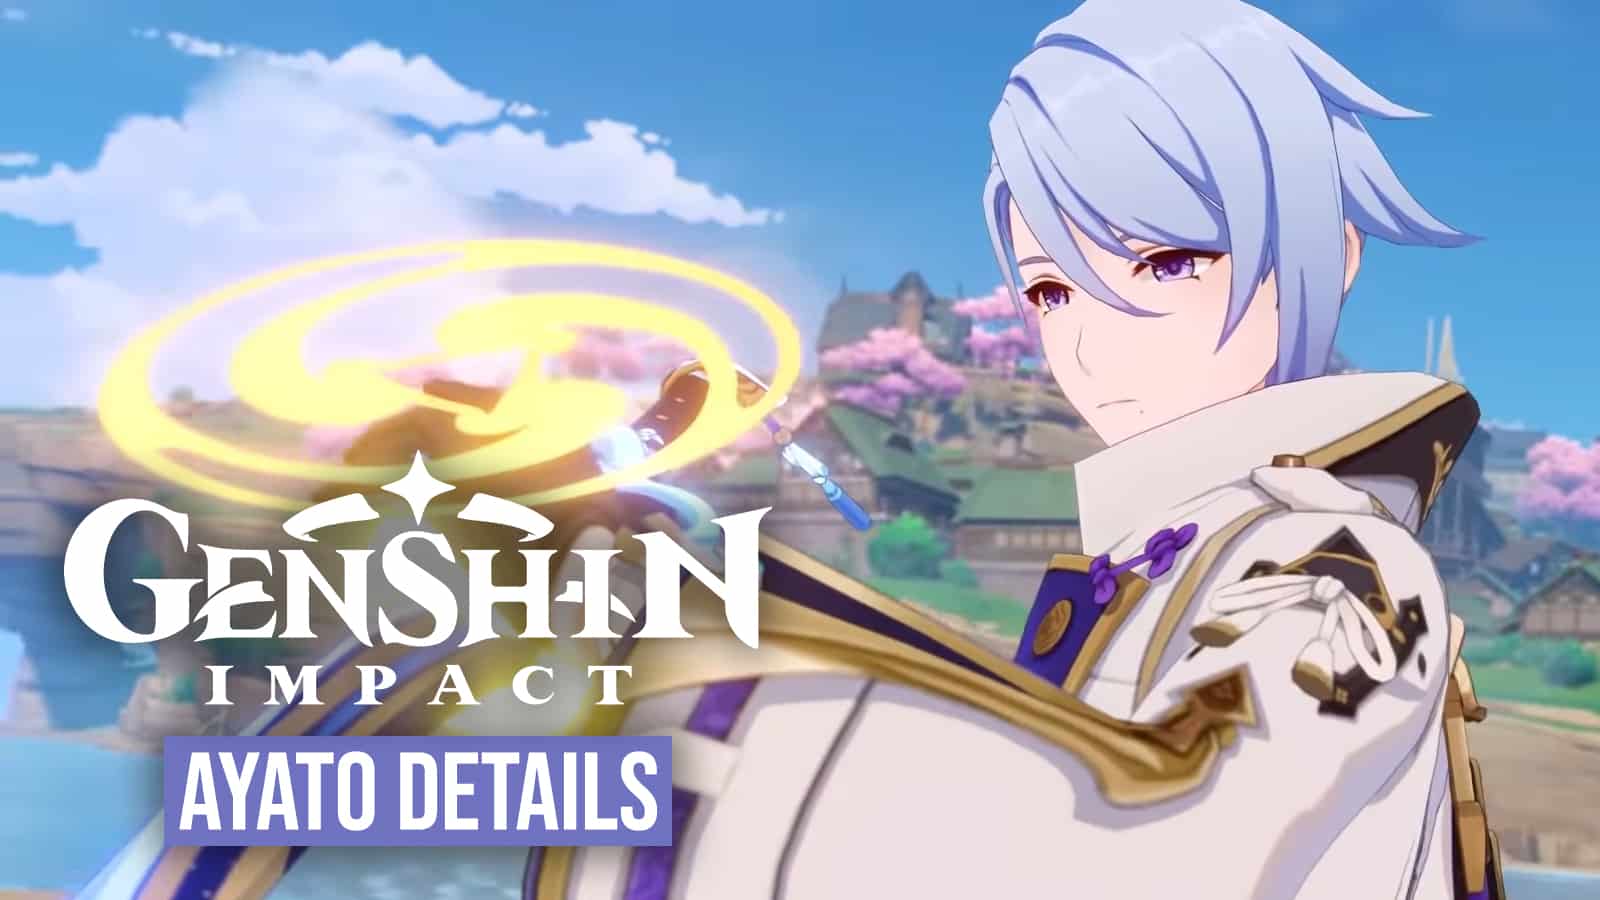 Genshin Impact Reveals 3 New Promotional Codes